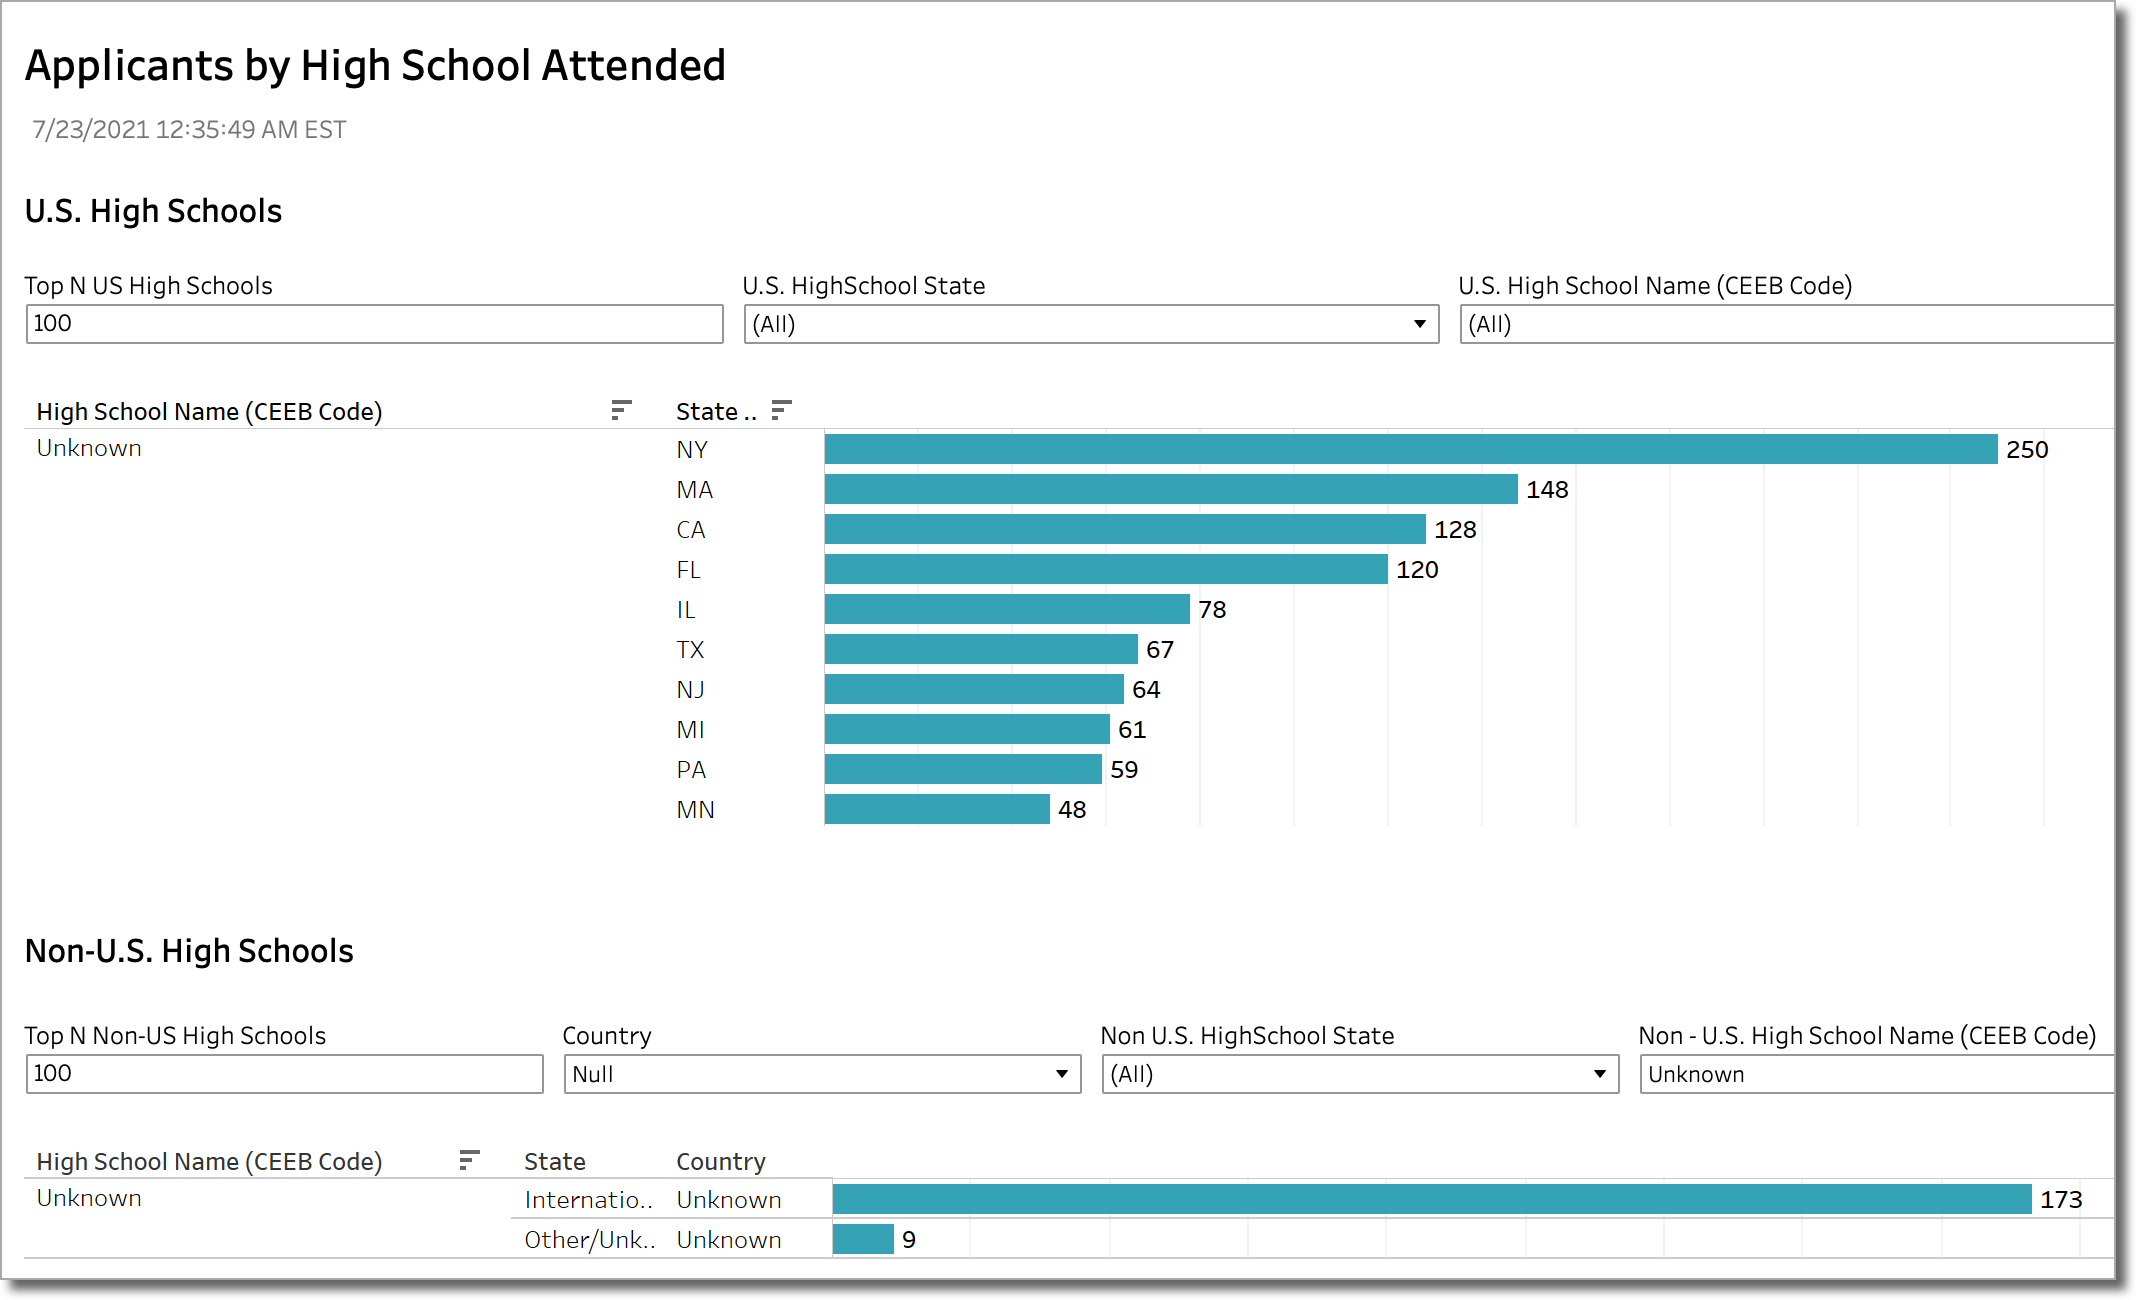 Example of an Applicants by High School Attended dashboard with various bar charts